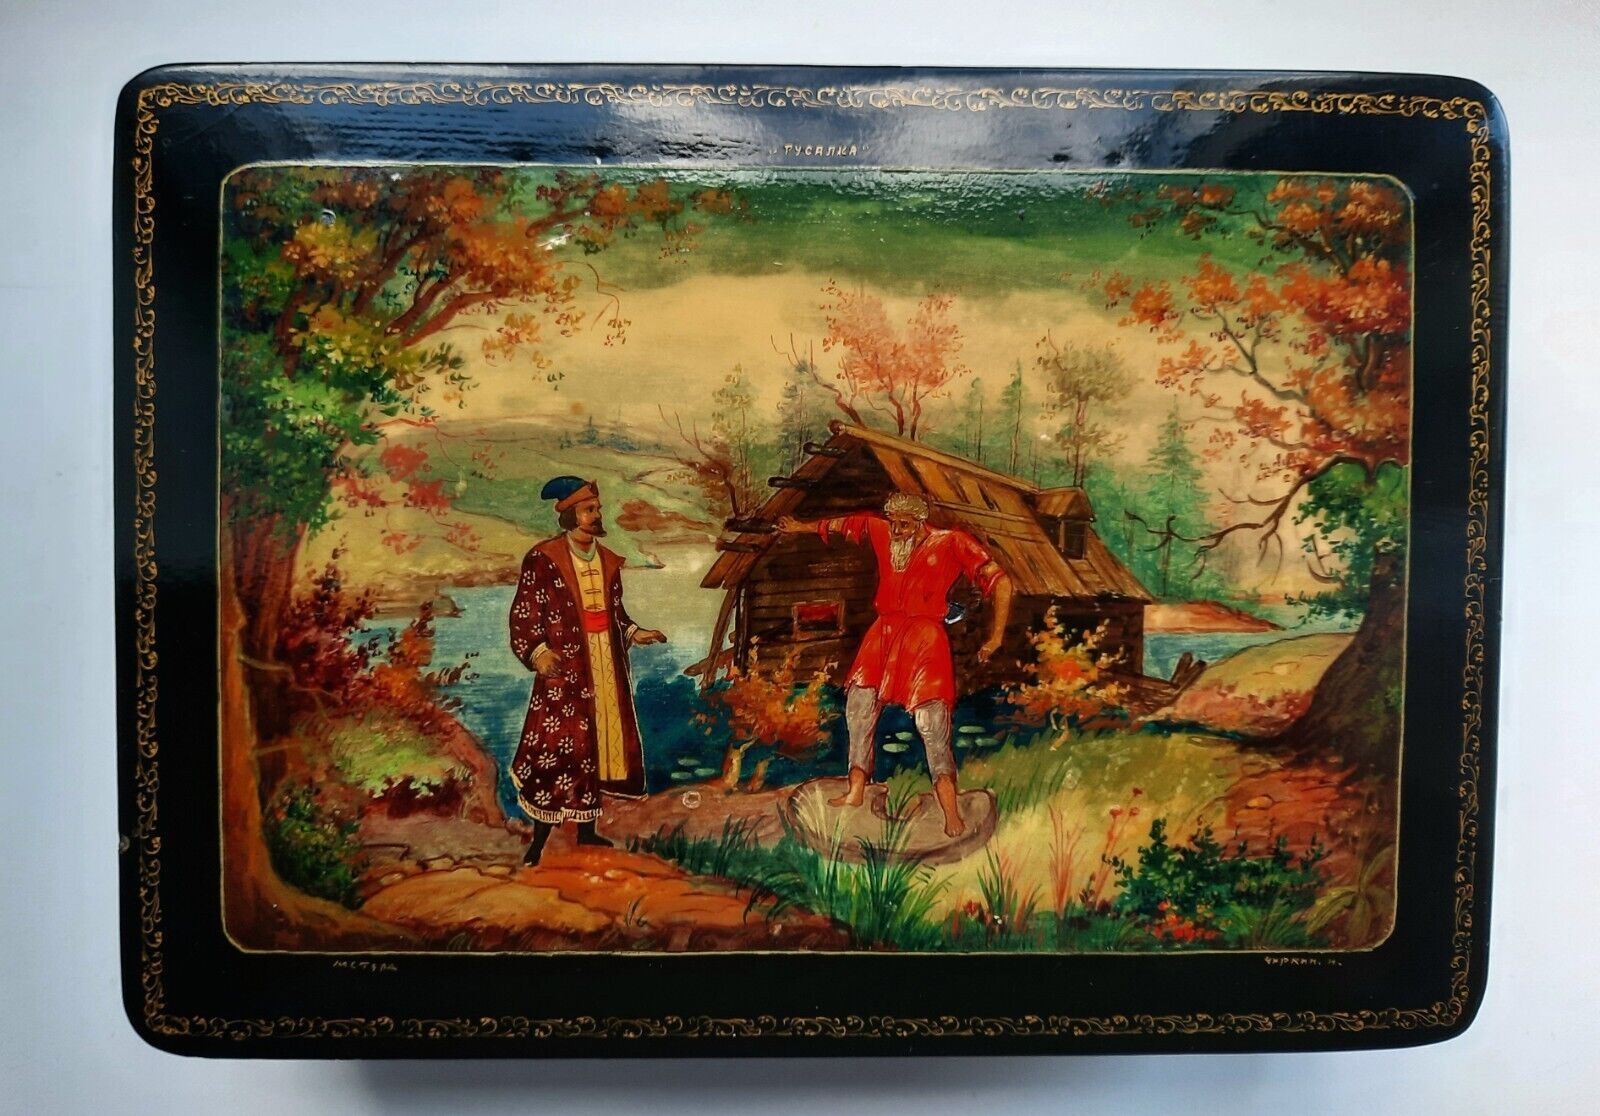 Mstera 1950's Russian Lacquer Box Vintage Handmade Painted by hand Palekh 